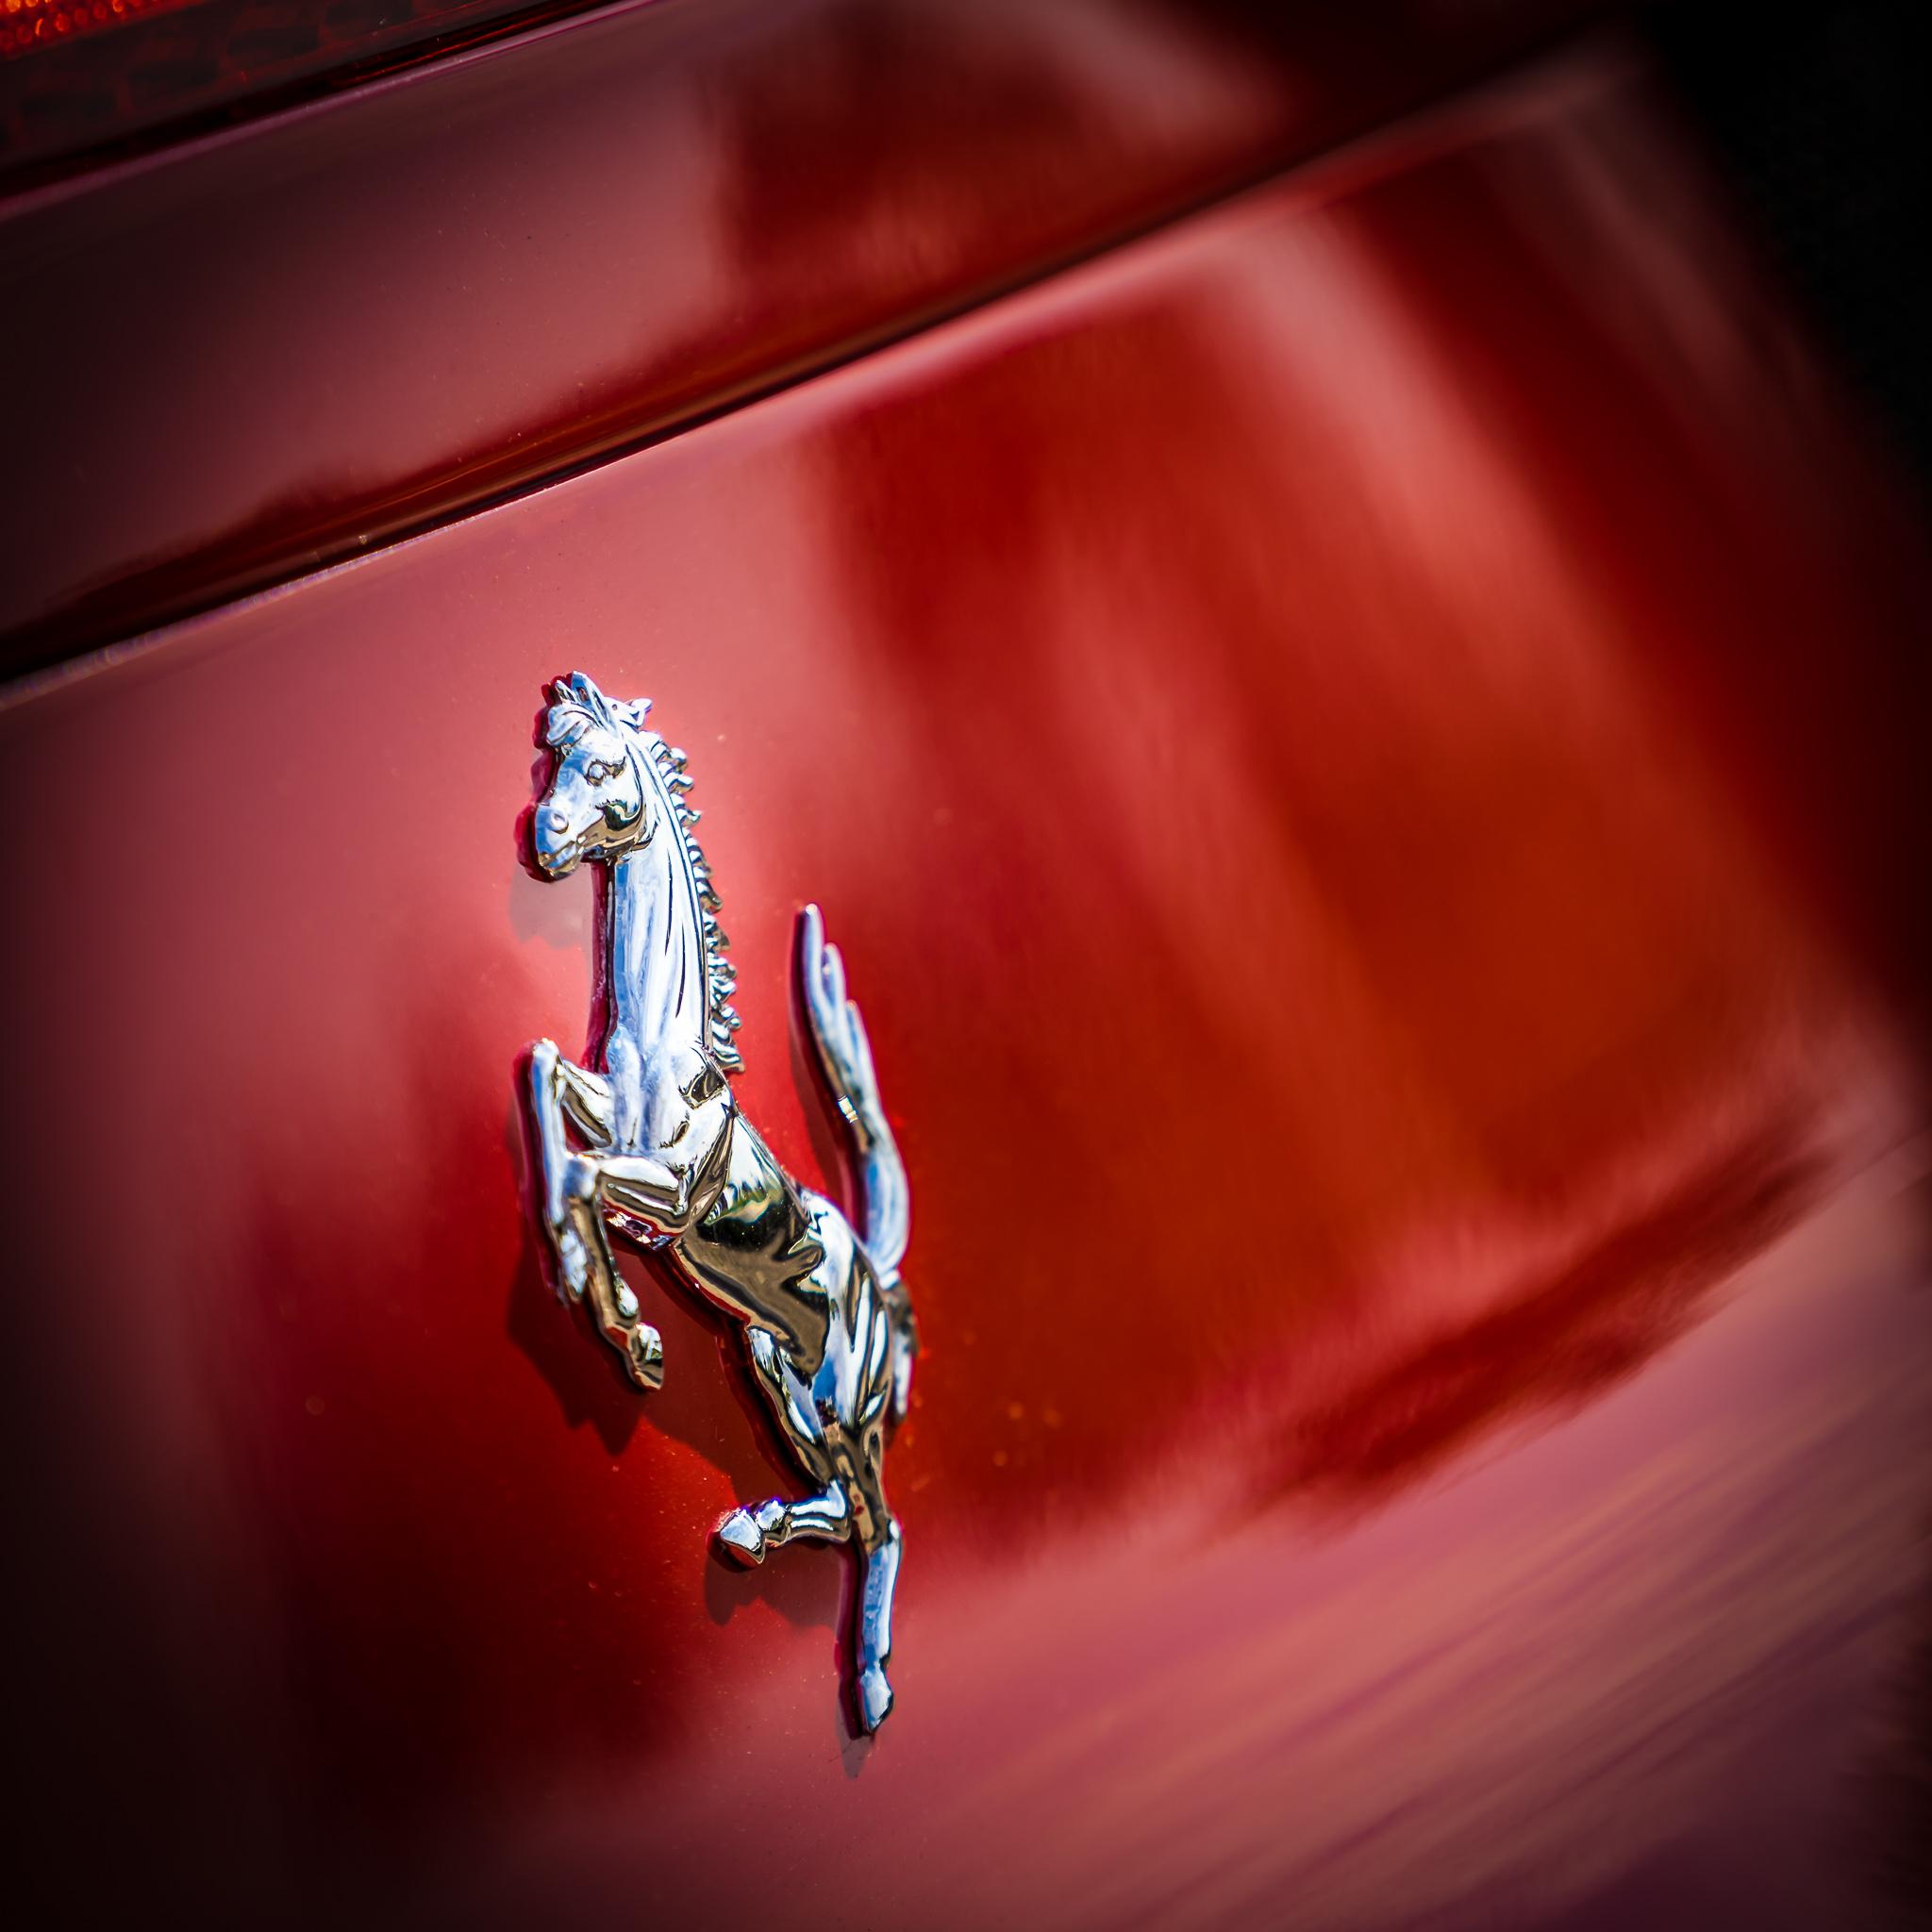 Red Ferrari Horse Logo - Picture of the Week: Ferrari's Prancing Horse | Andy's Travel Blog